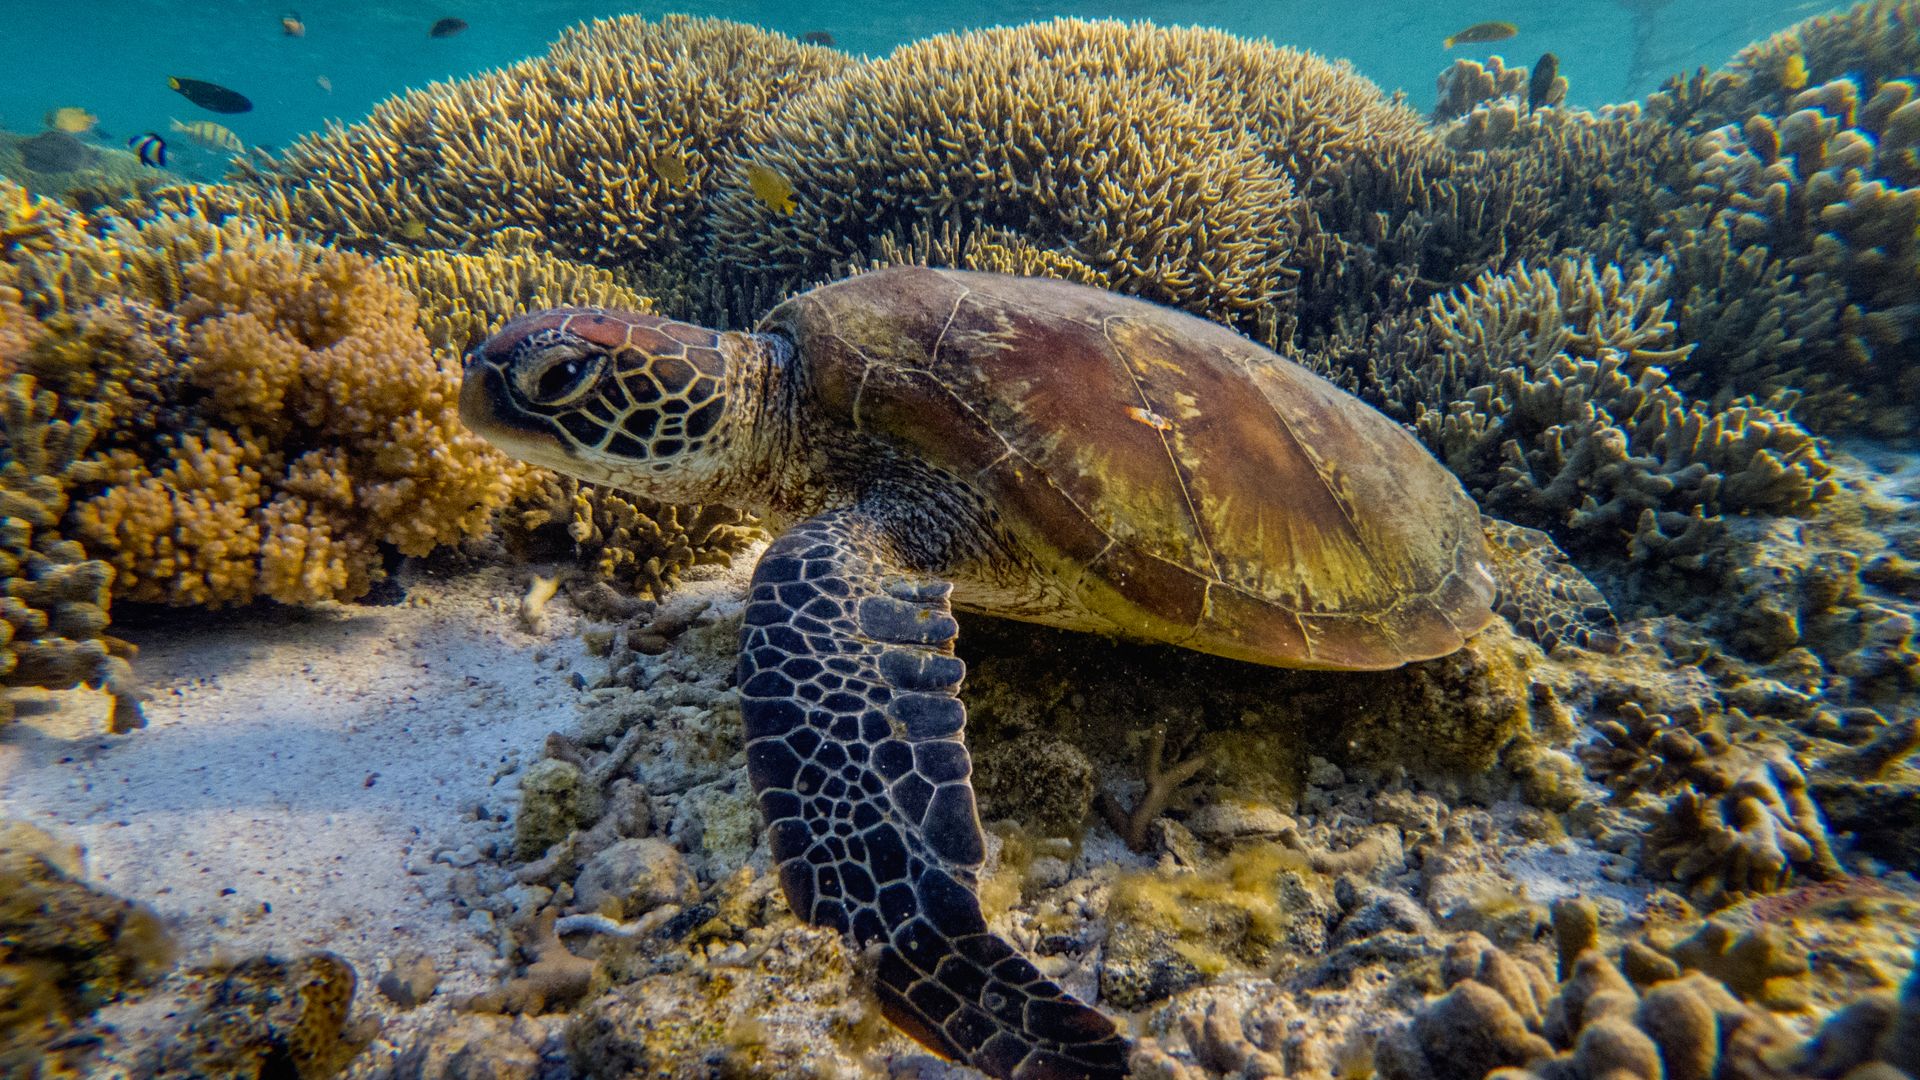  A green sea turtle is flourishing among the corals at lady Elliot island.